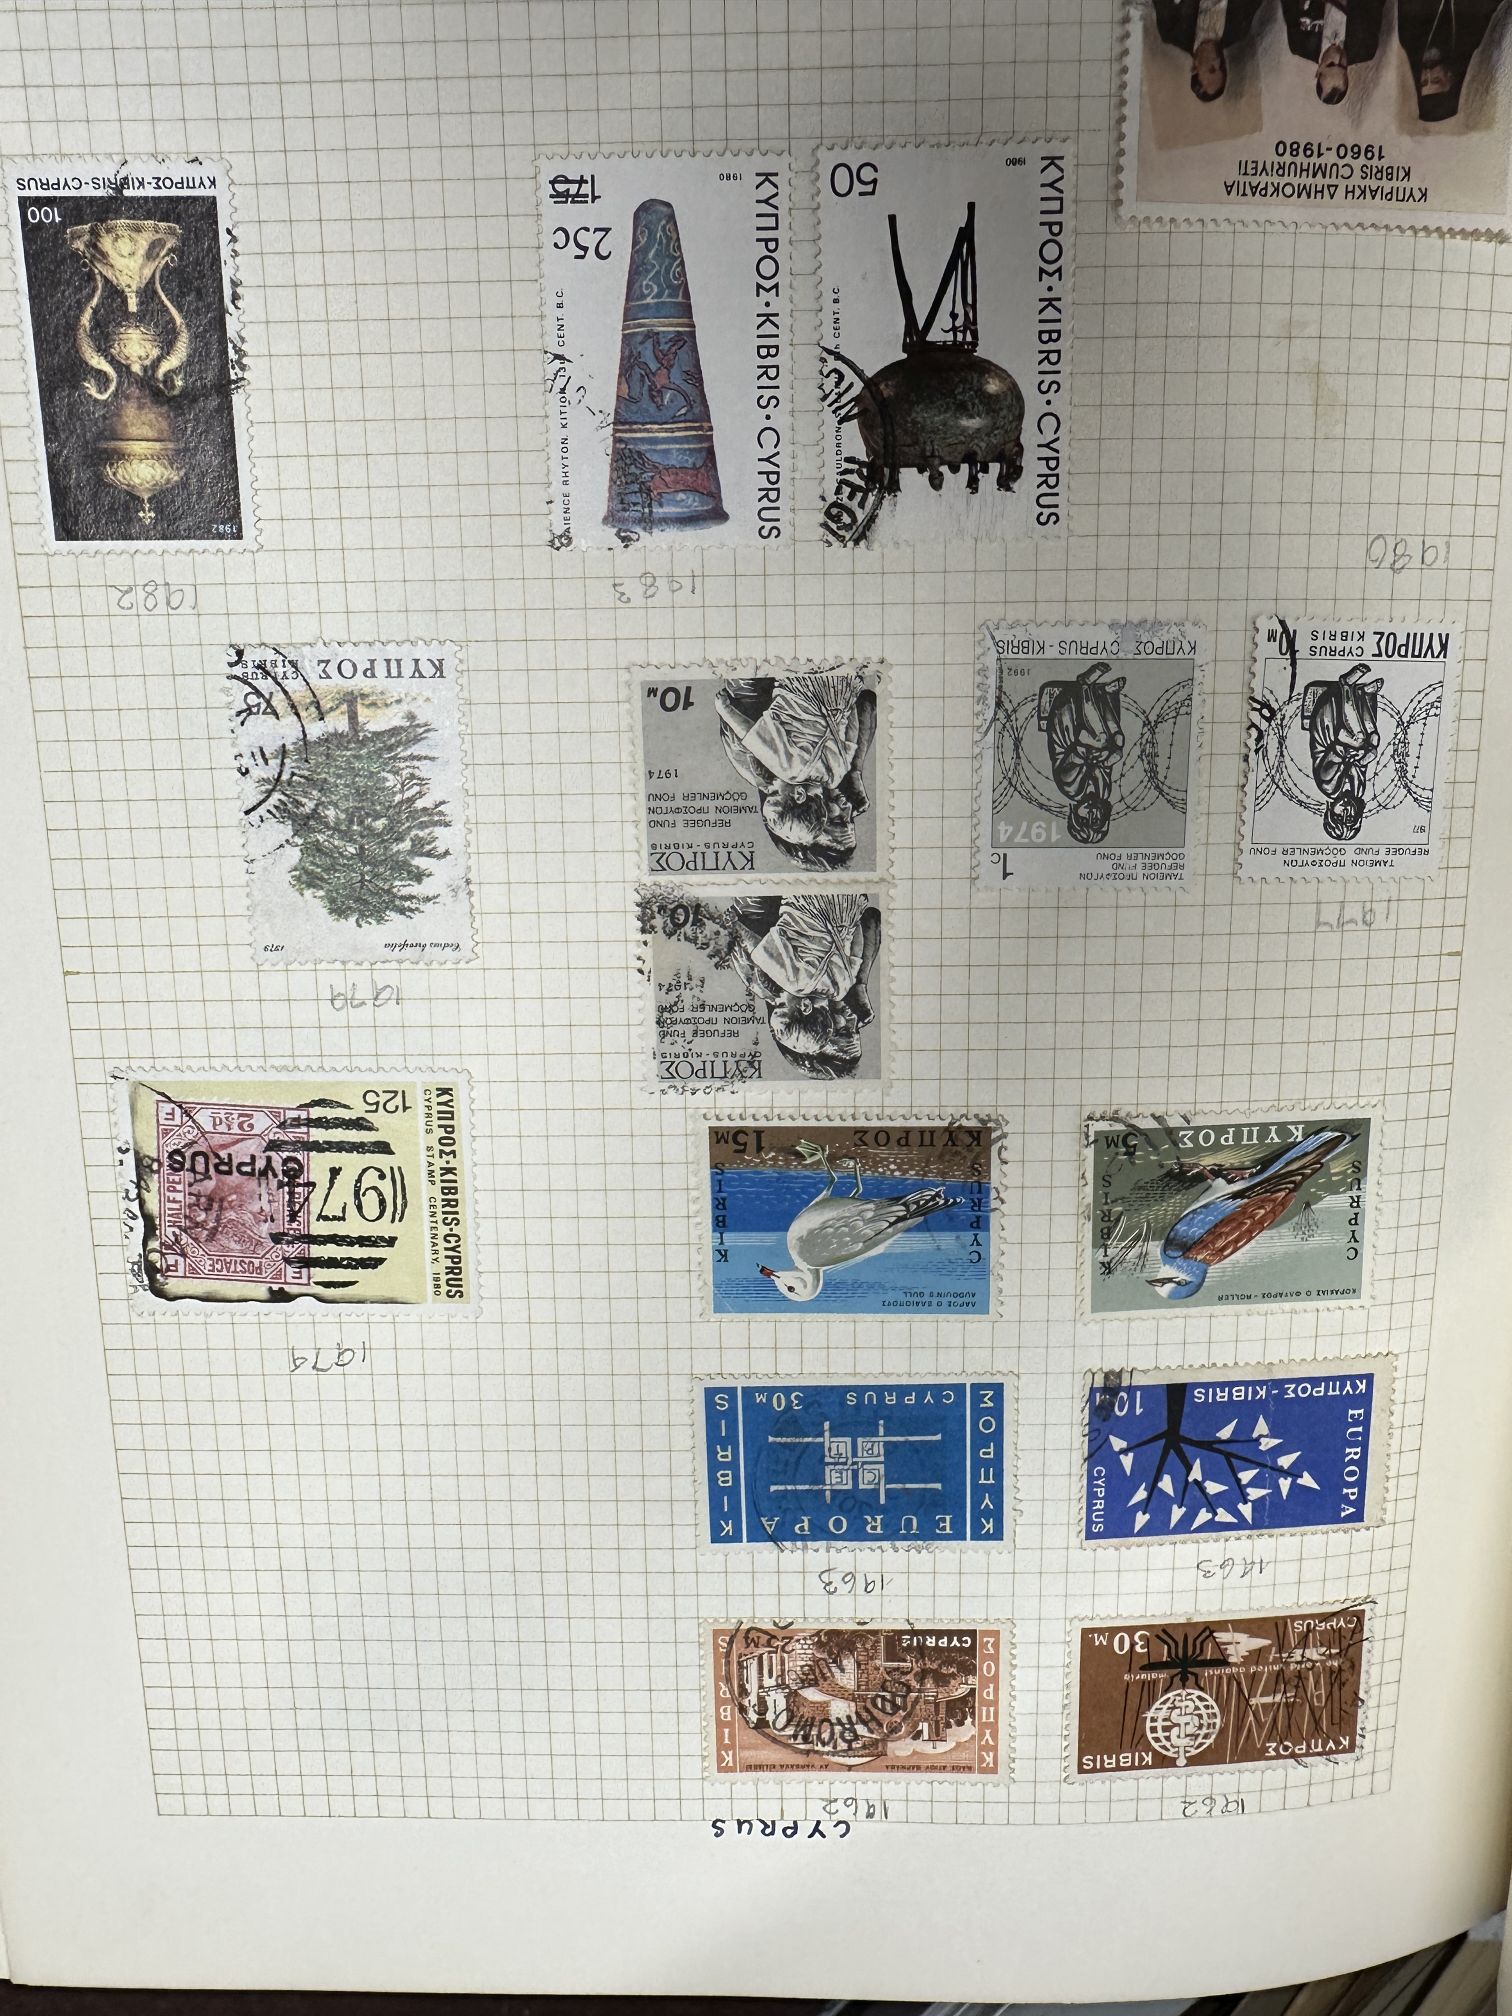 World, two stockbooks of stamps from South Africa, one album of stamps from the Countries of the - Image 2 of 2